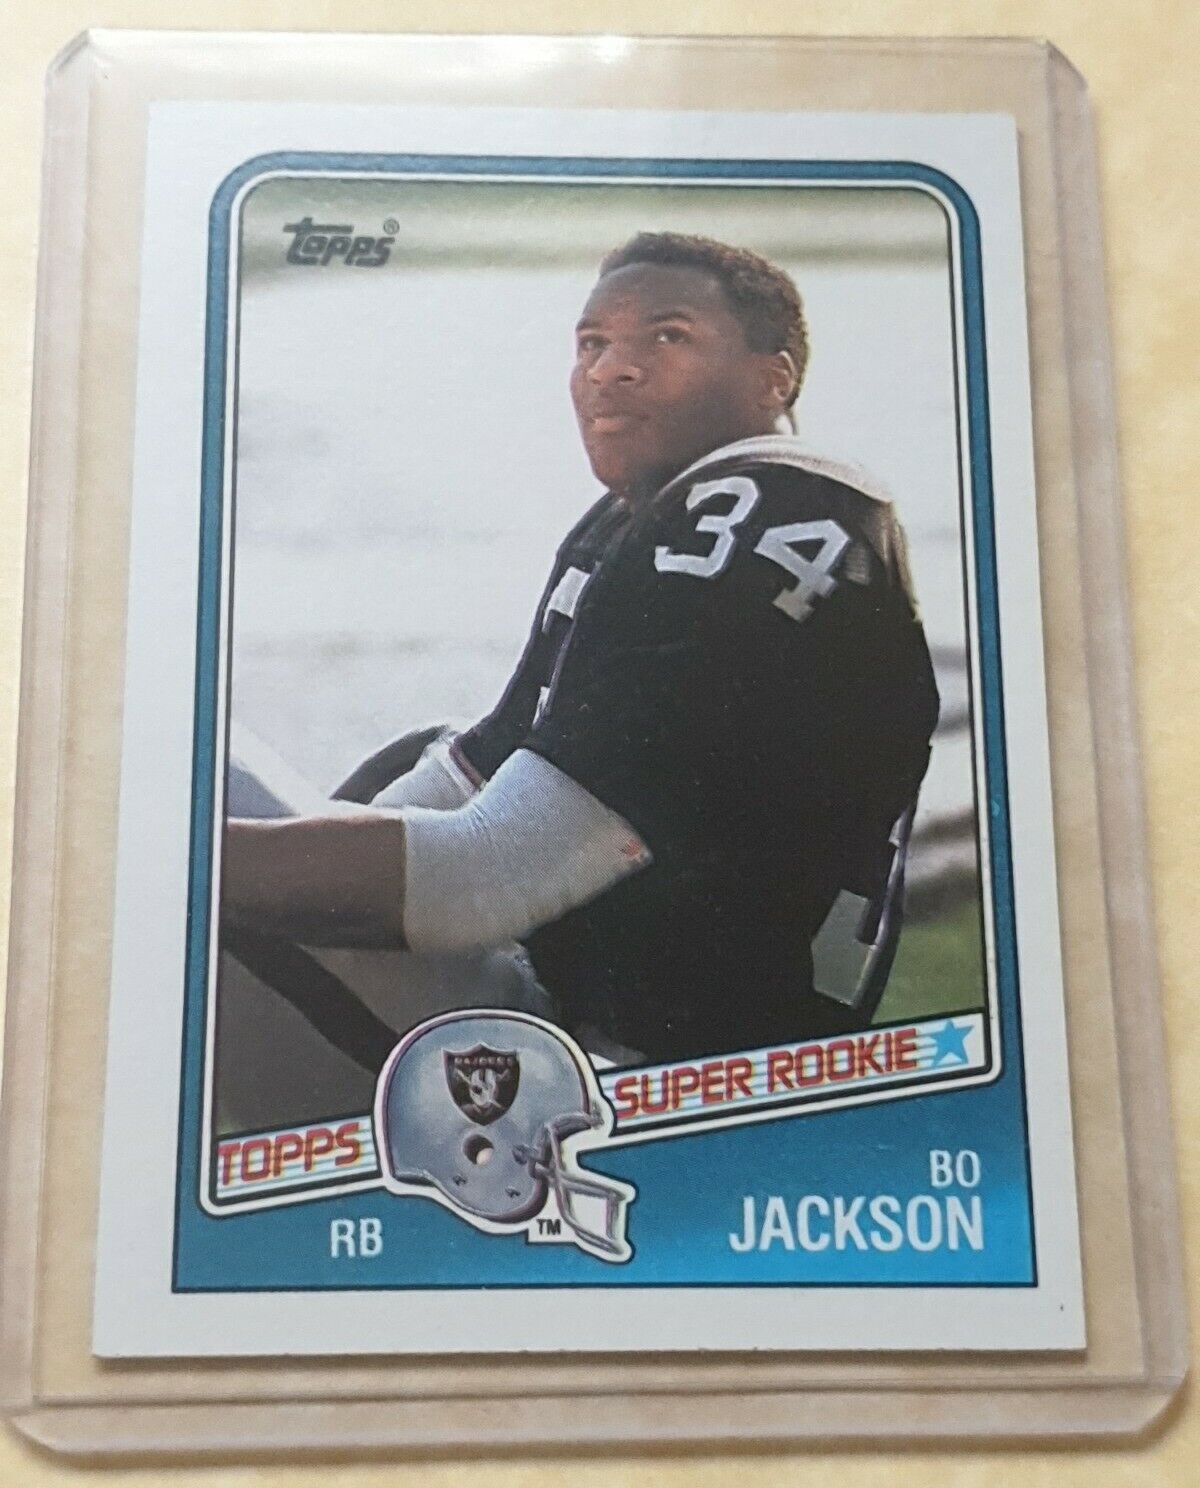 1988 BO JACKSON SUPER ROOKIE CARD TOPPS #327 LOS ANGELES RAIDERS COLLECTION